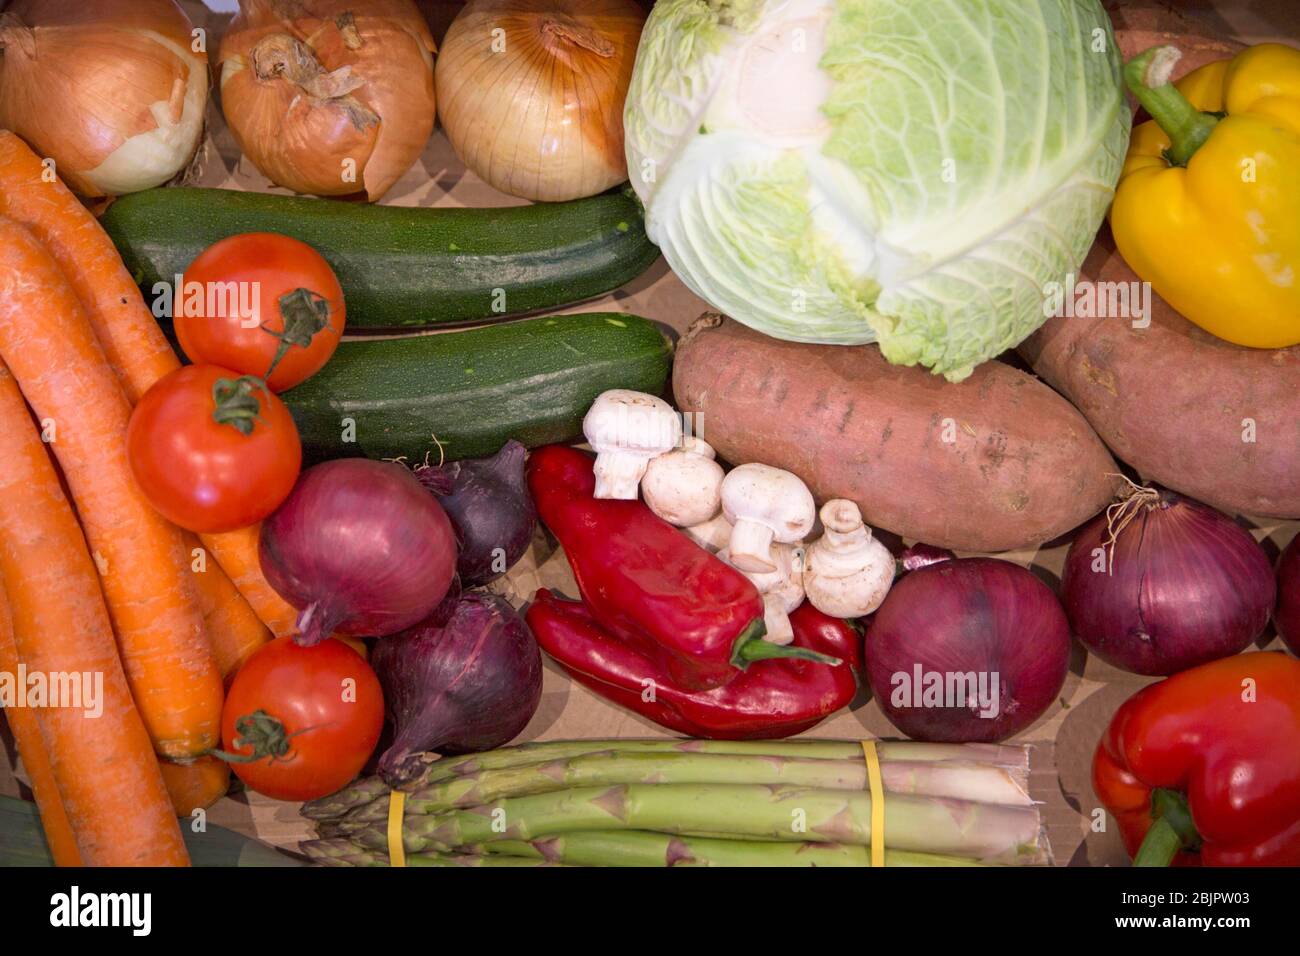 Box of various fresh vegetables as delivered by greengrocer in London Stock Photo